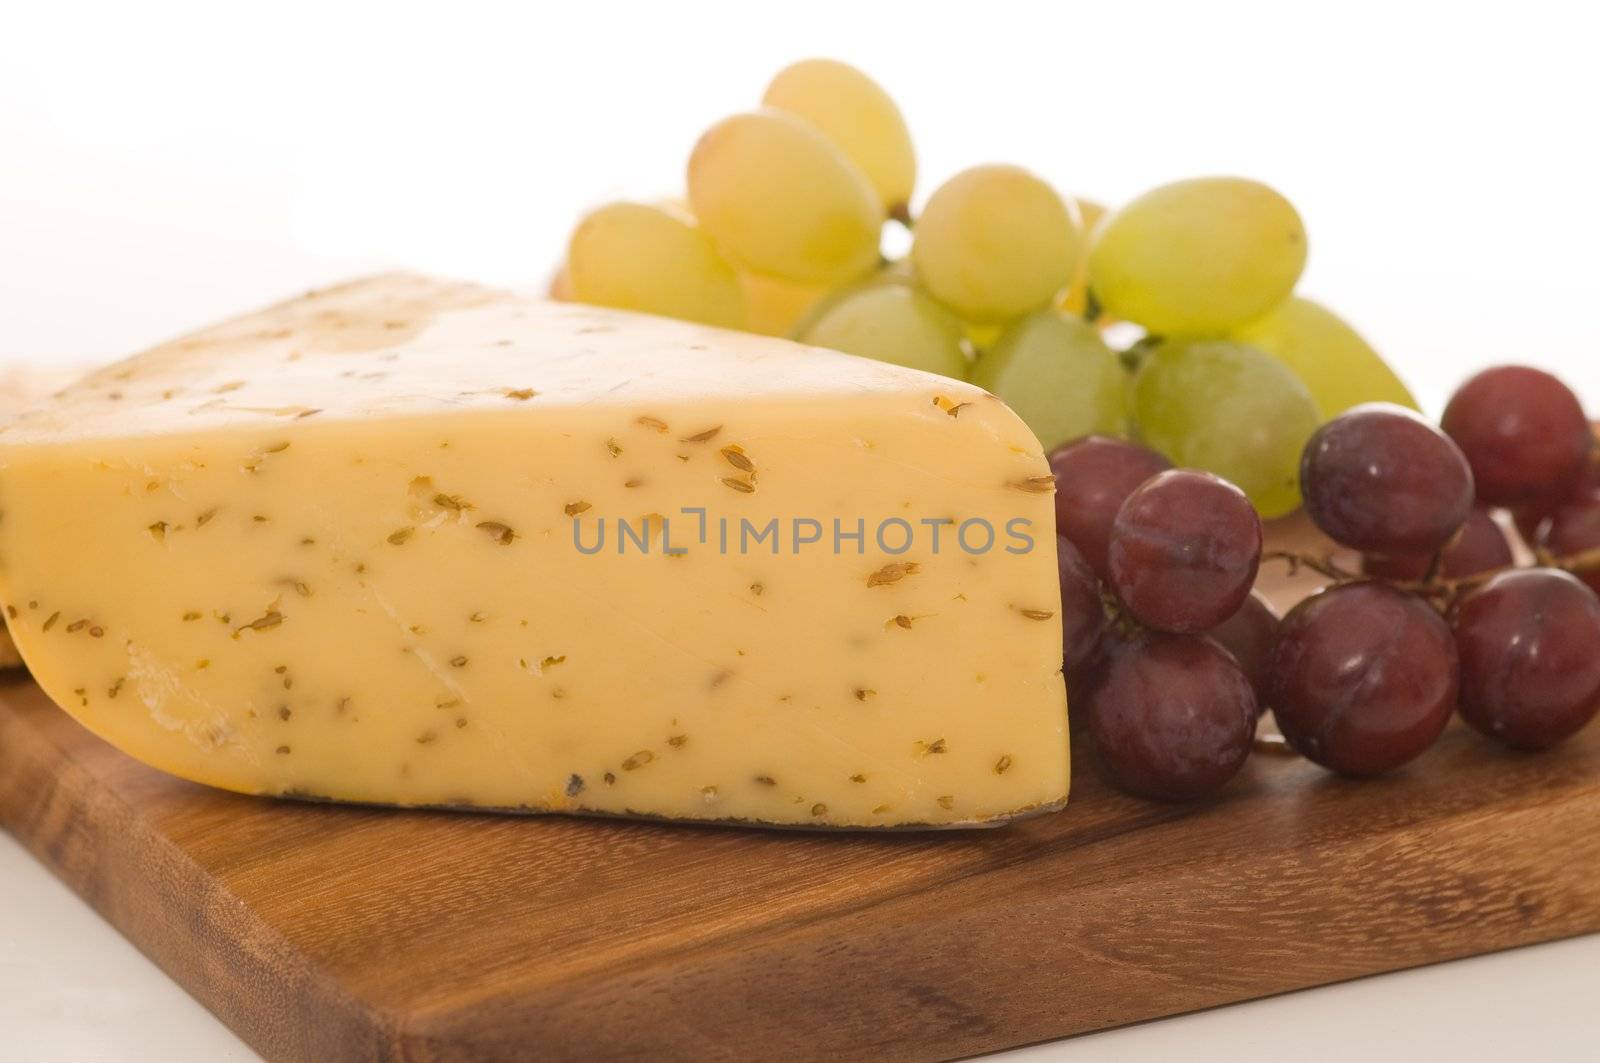 Cheese and Grapes by billberryphotography